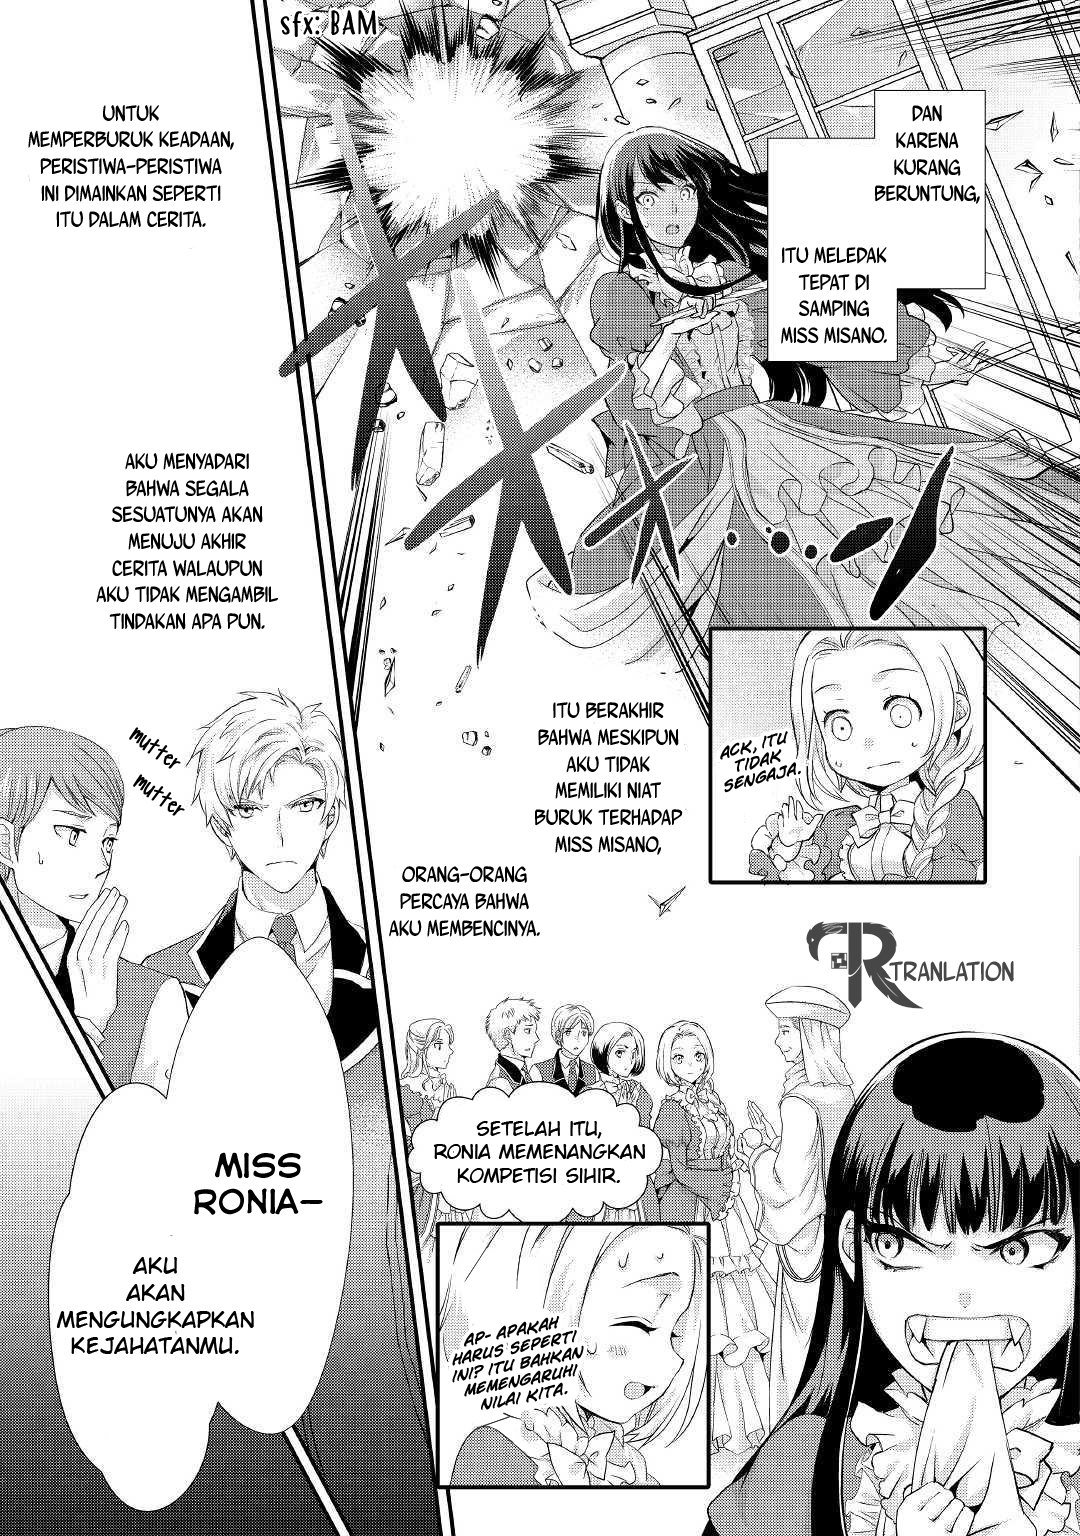 Milady Just Wants to Relax Chapter 07.2